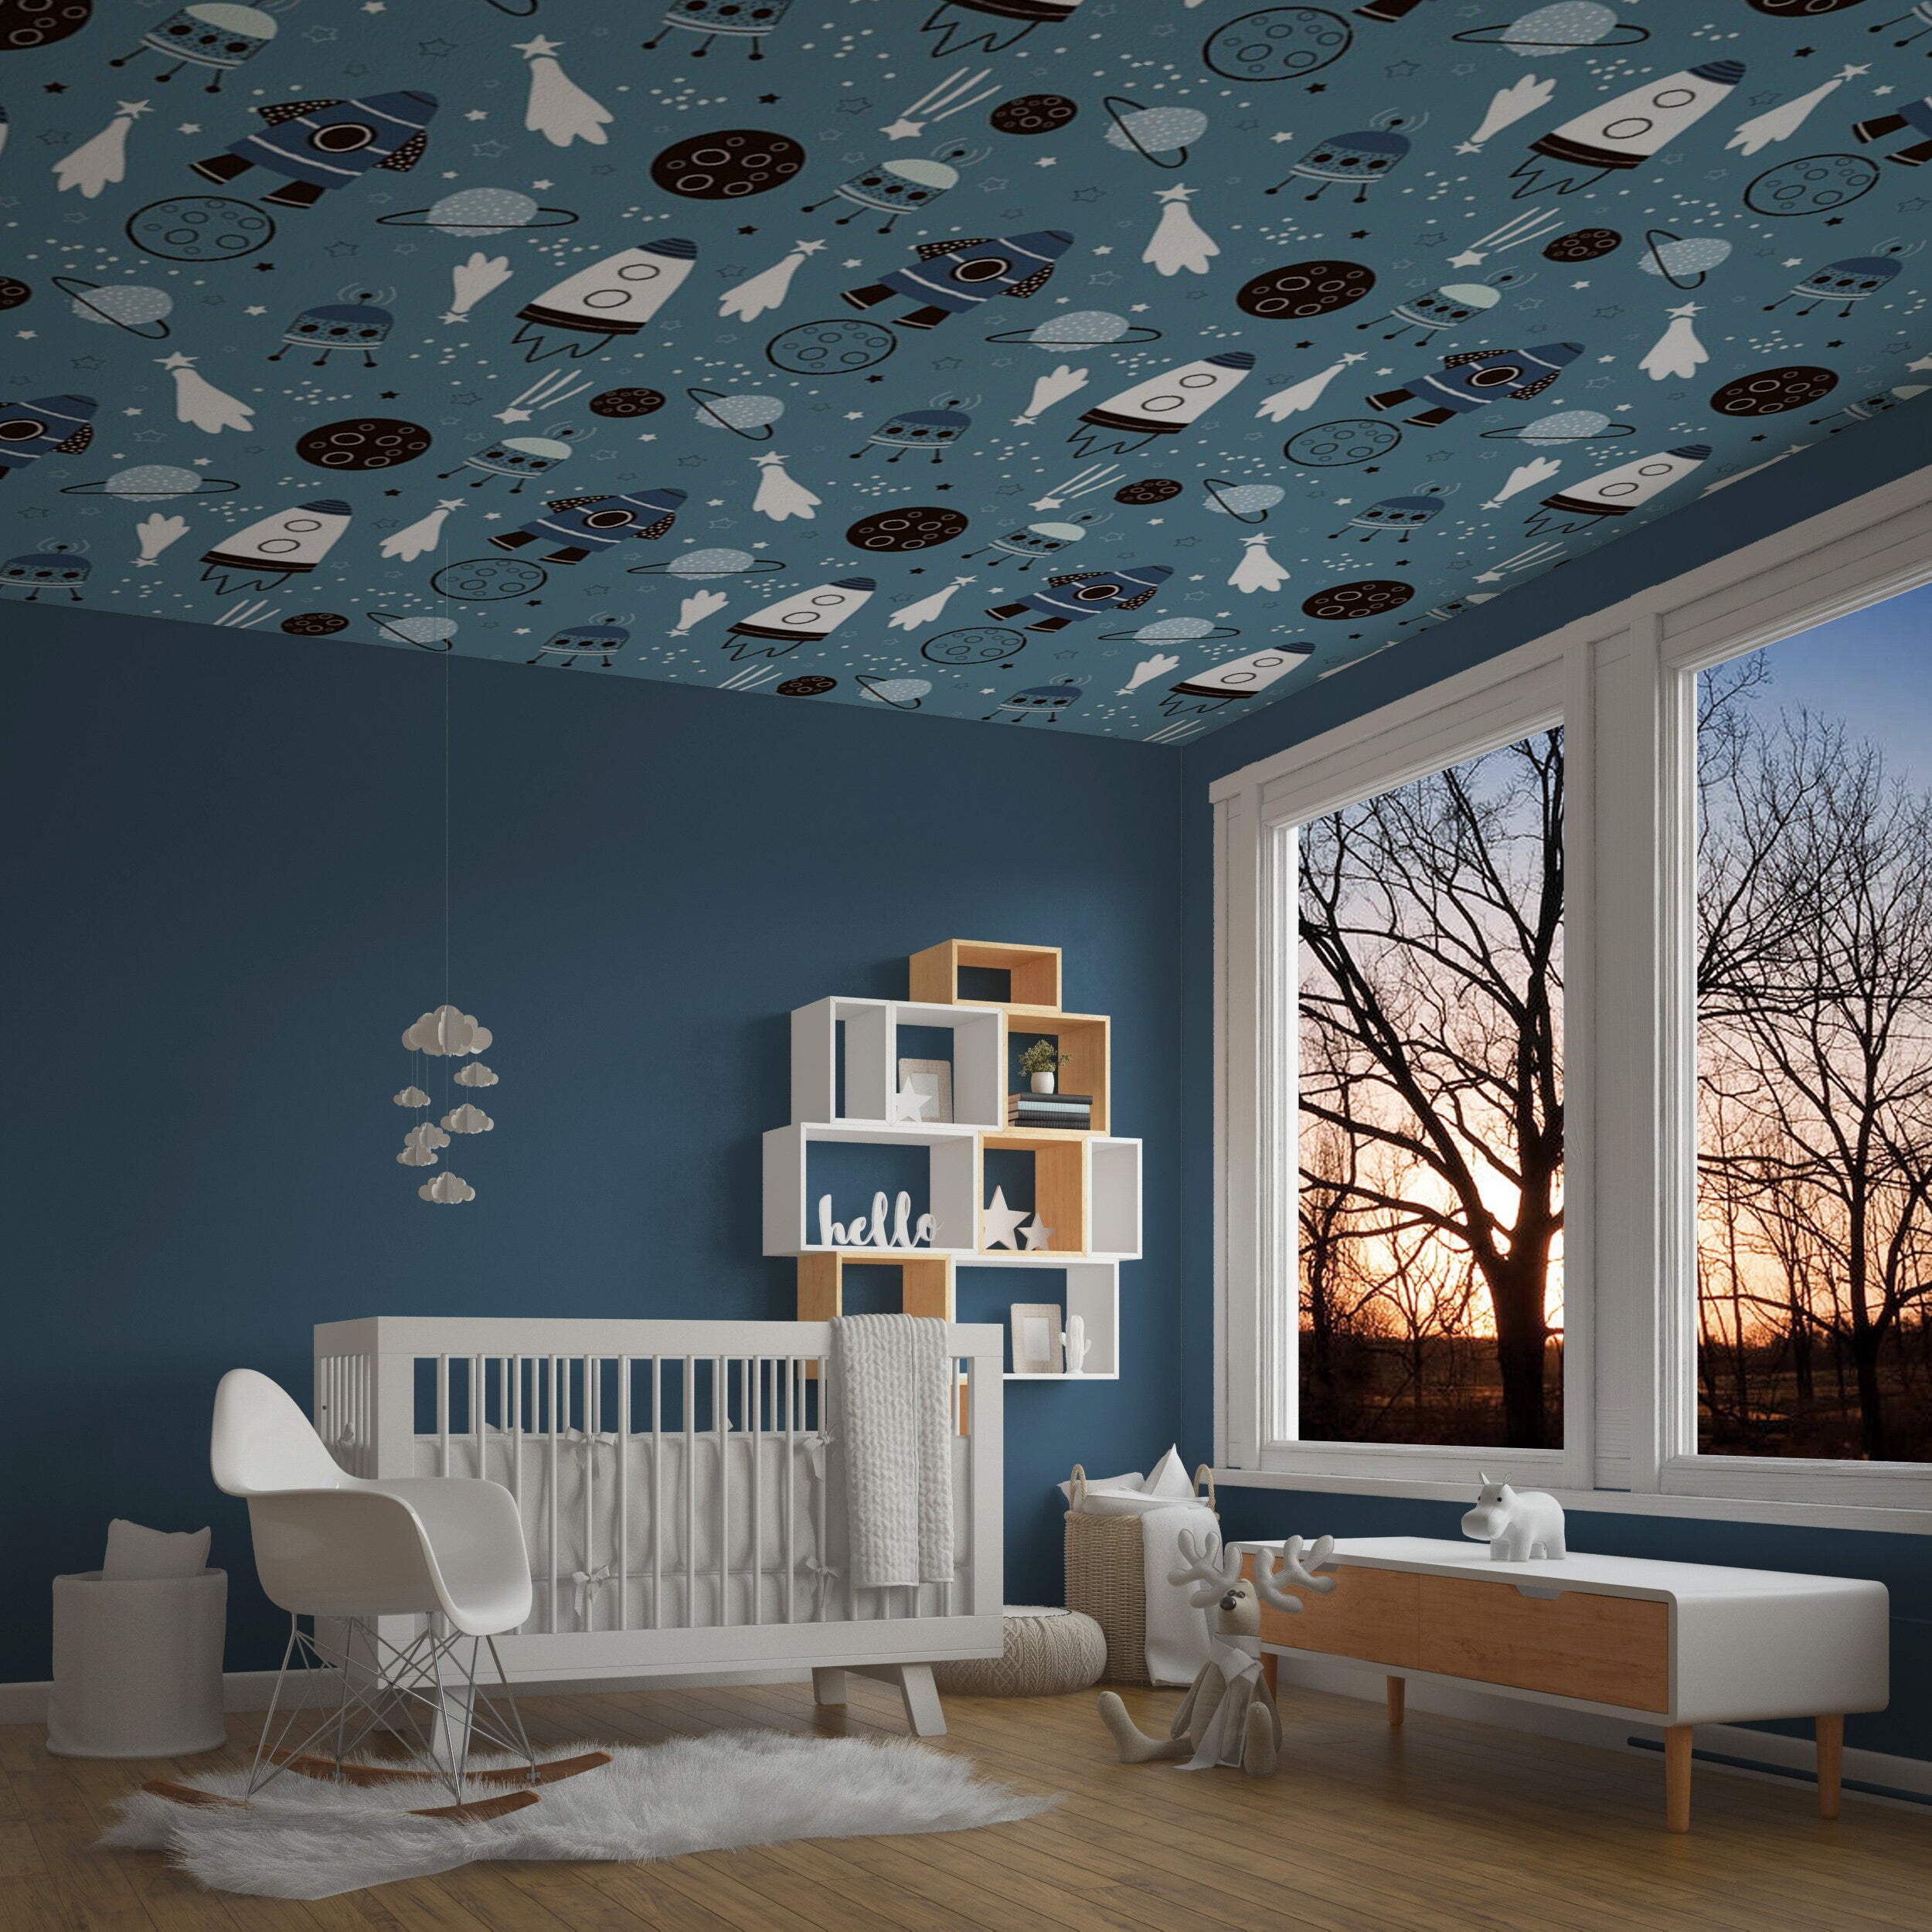 Spaceship Pattern Removable Wallpaper, Kids Bedroom Decor, Outer Space